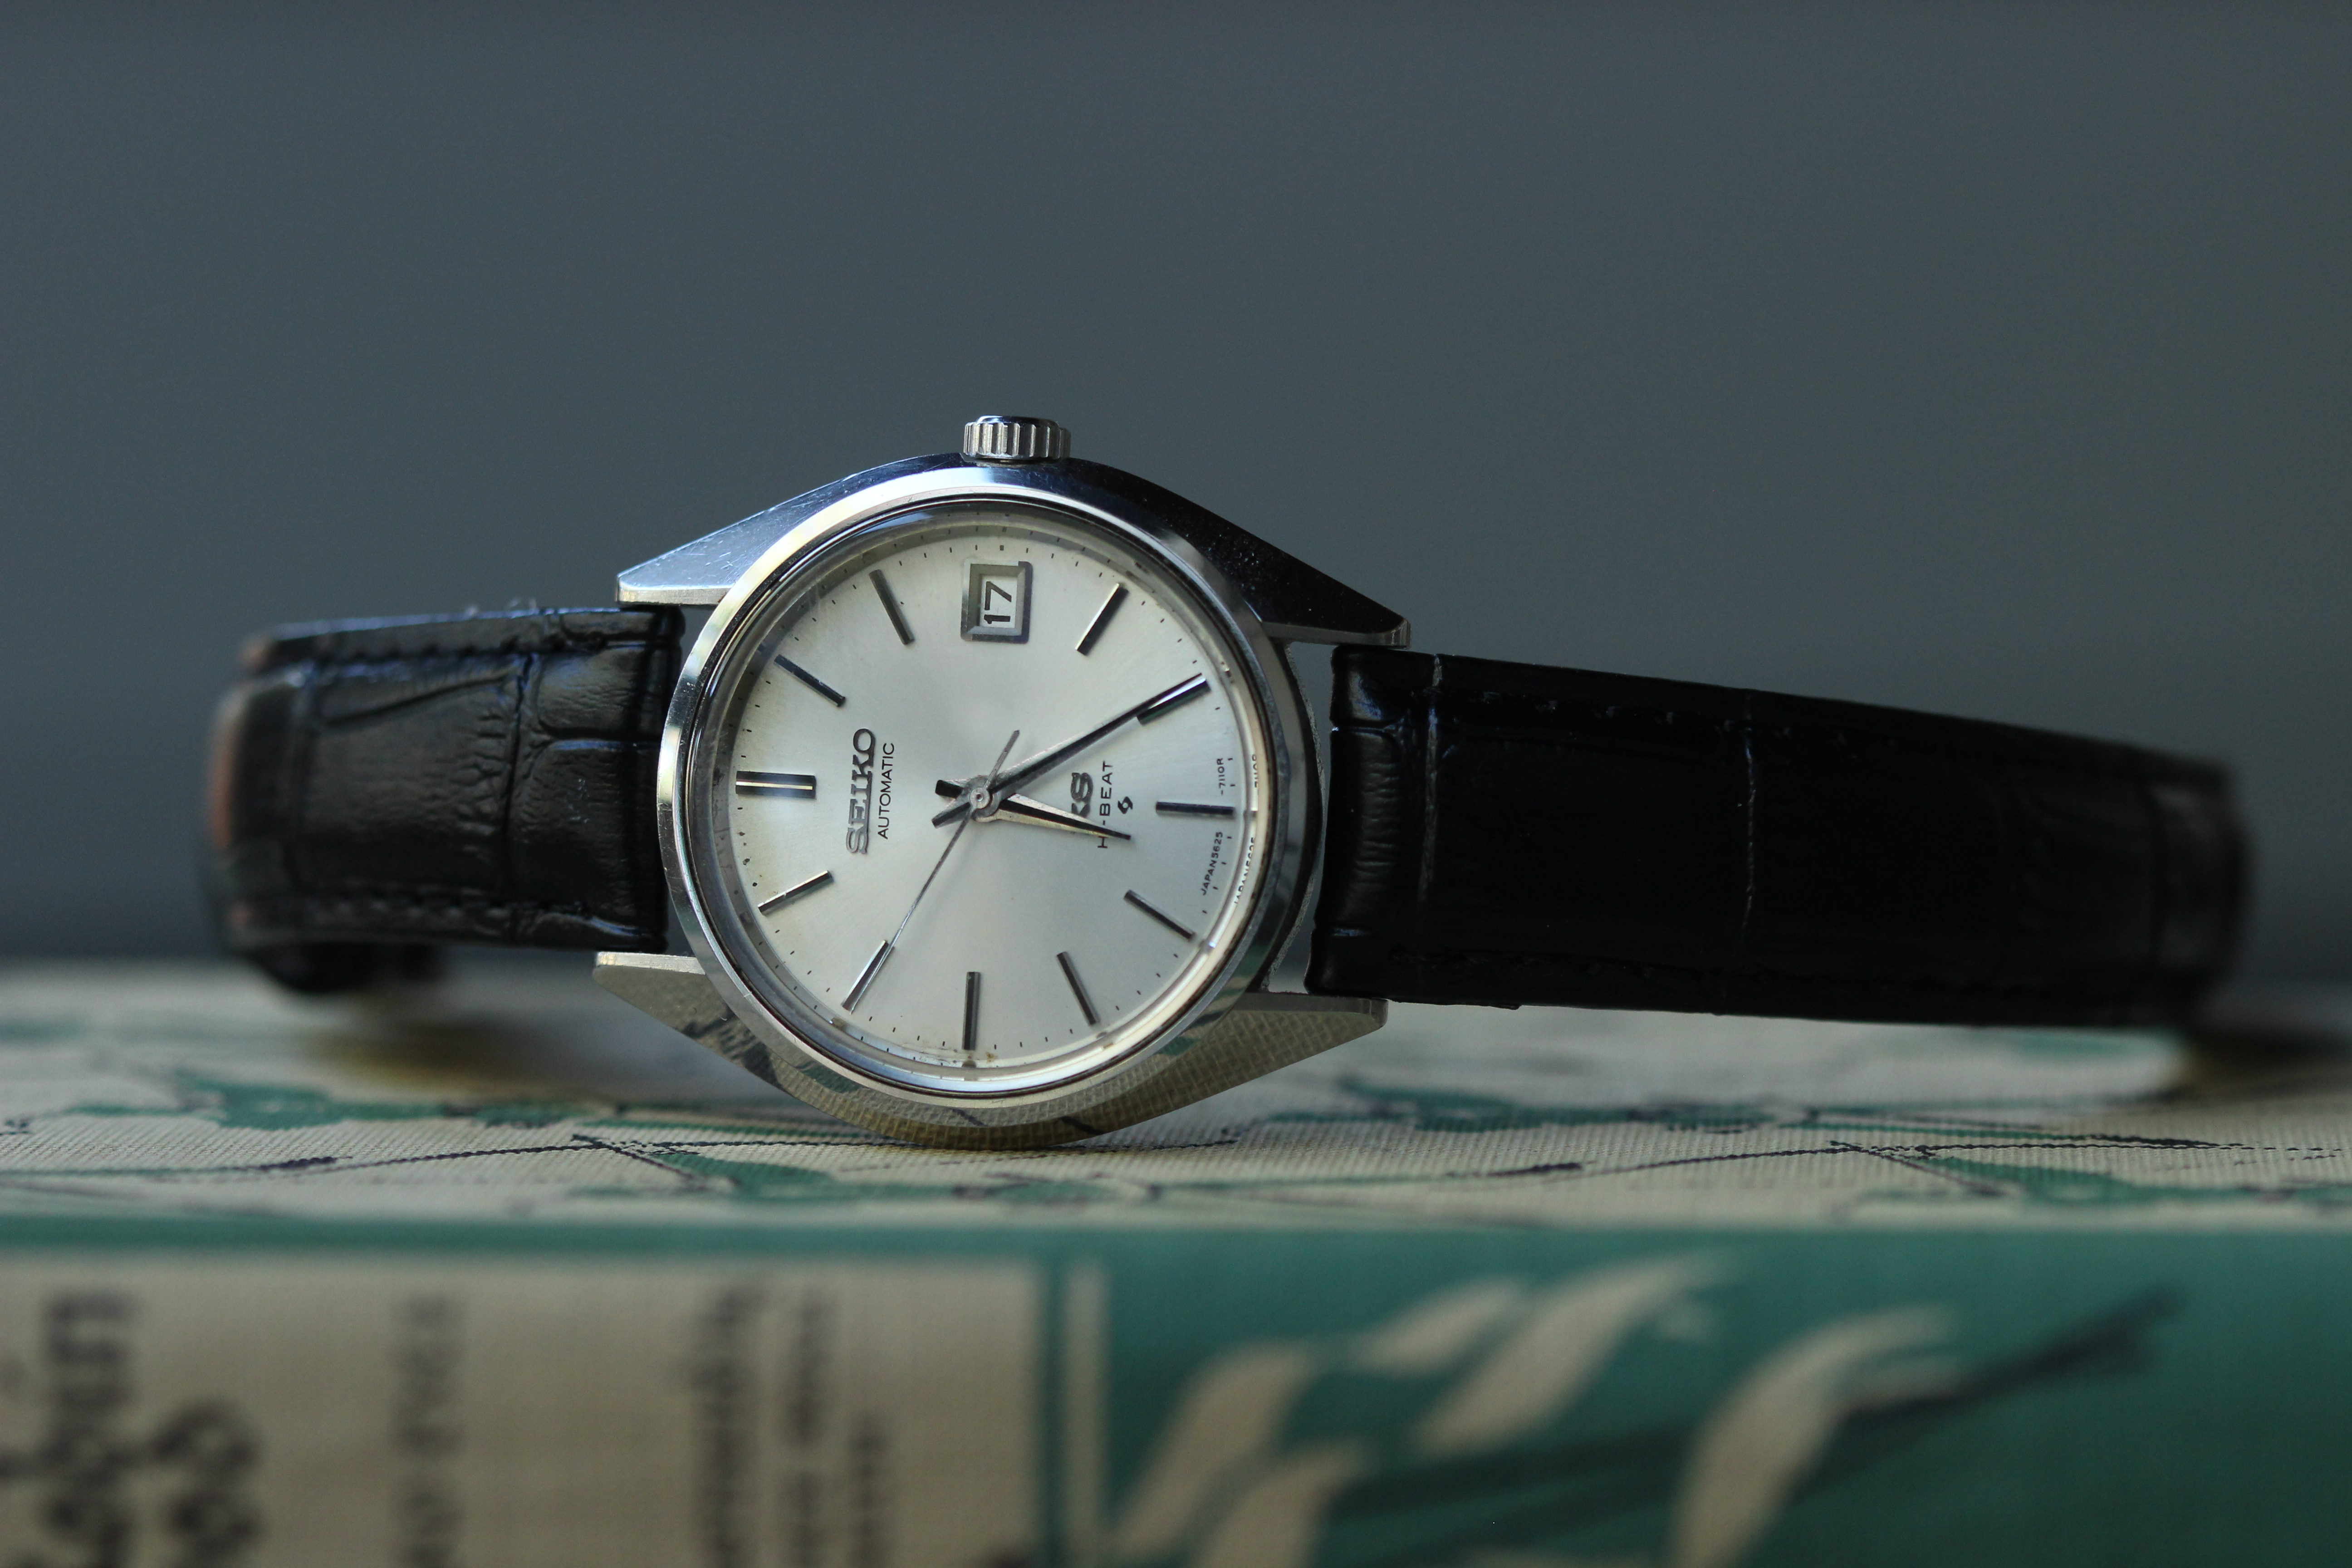 Vintage Review: King Seiko Ref. 5625-7111 Watch